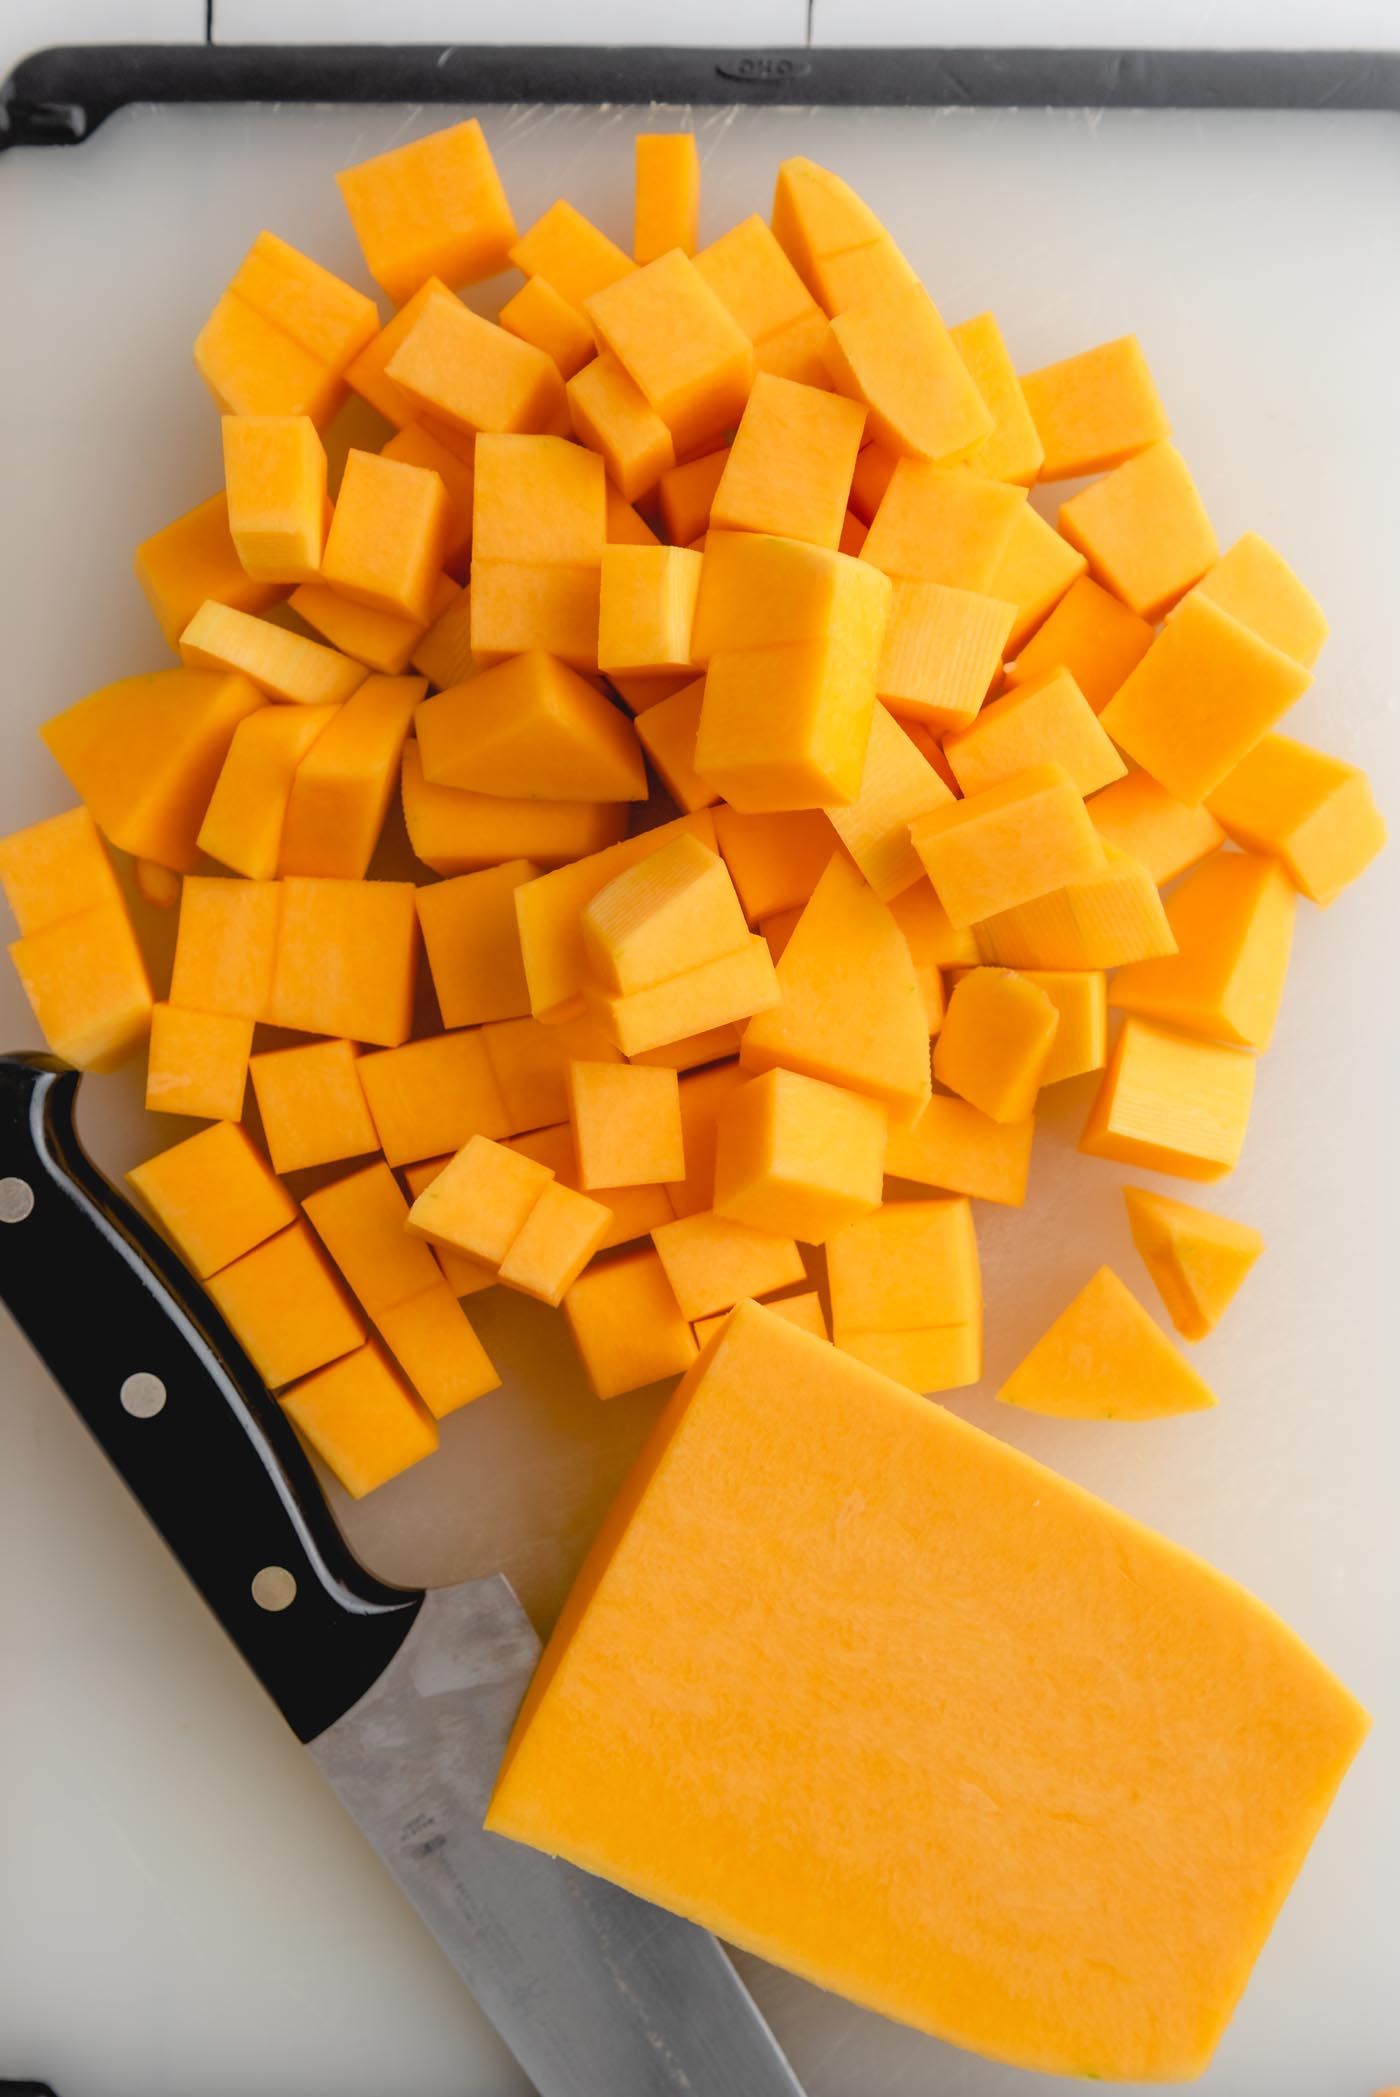 Cubed butternut squash in a pile on a cutting board with a knife beside it.